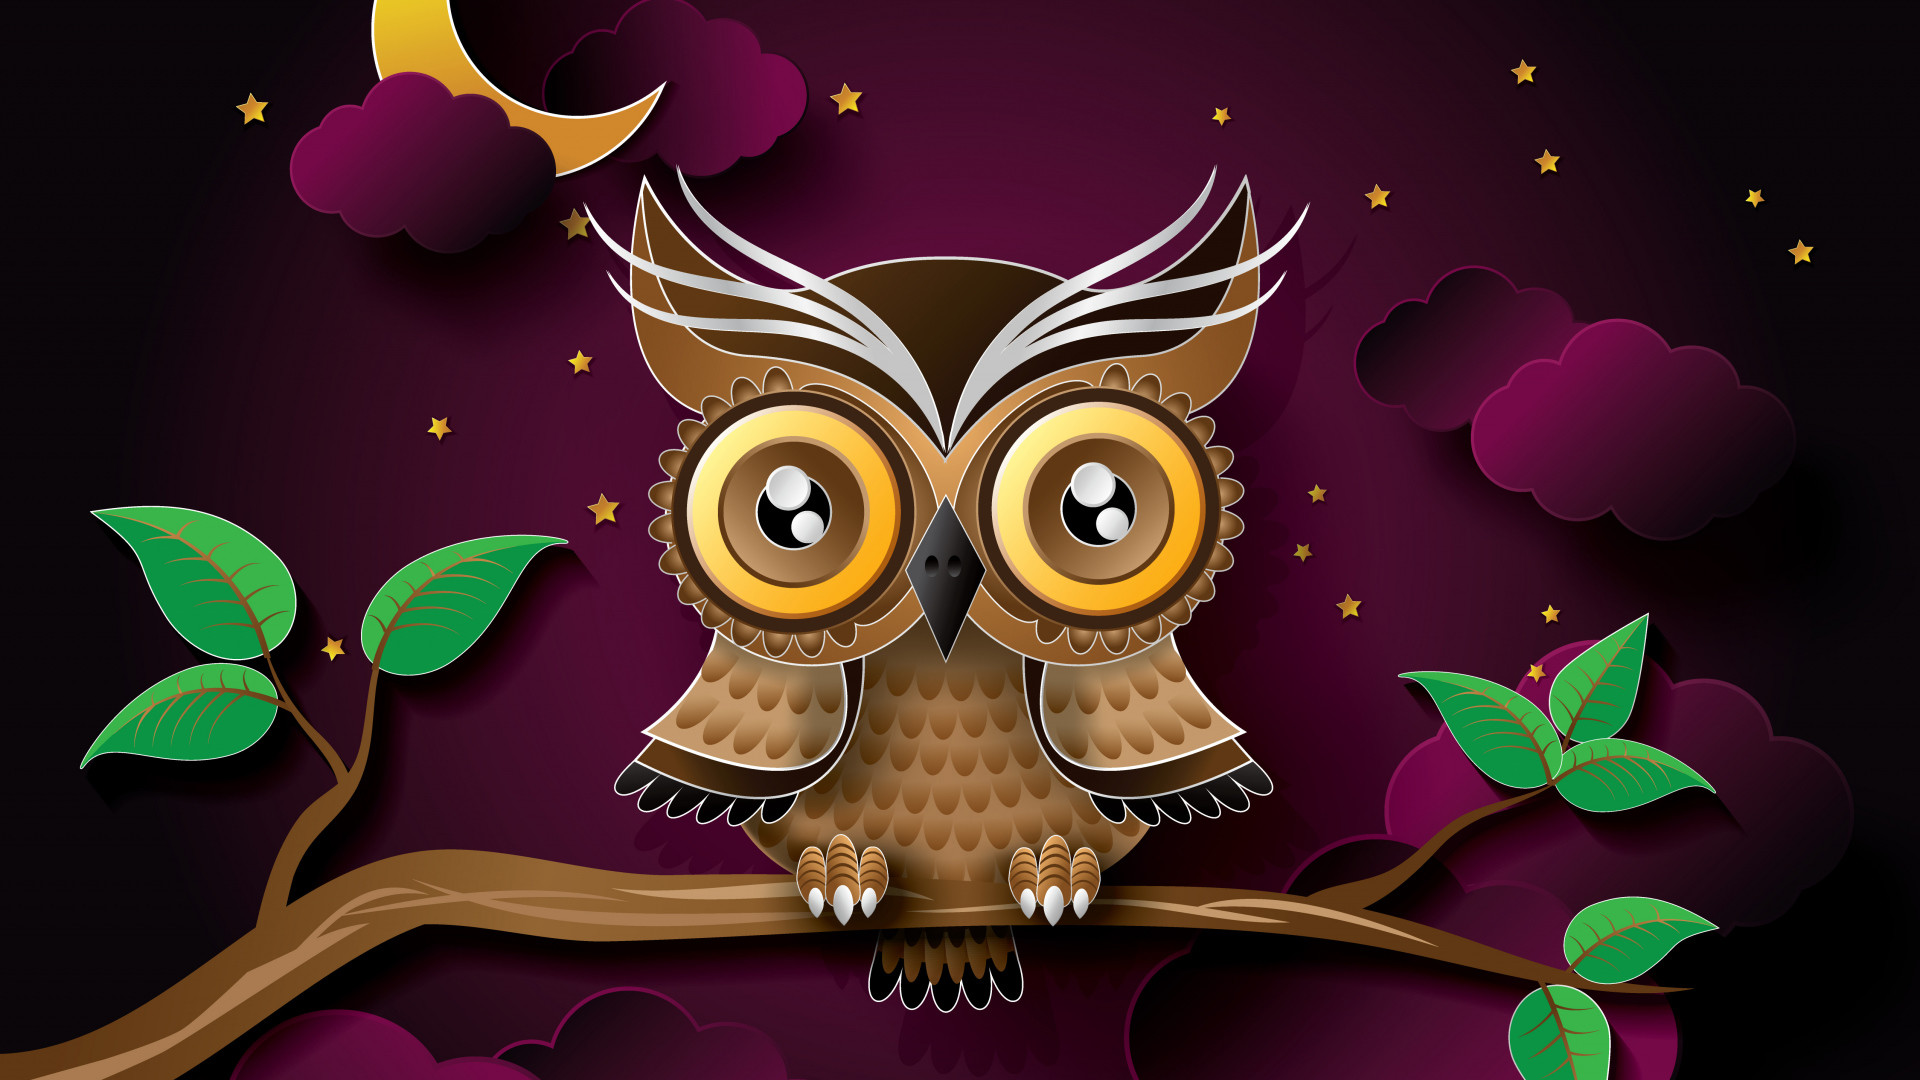 1920x1080 Full HD 1080p Owl Wallpapers HD, Desktop Backgrounds , Images and  Pictures